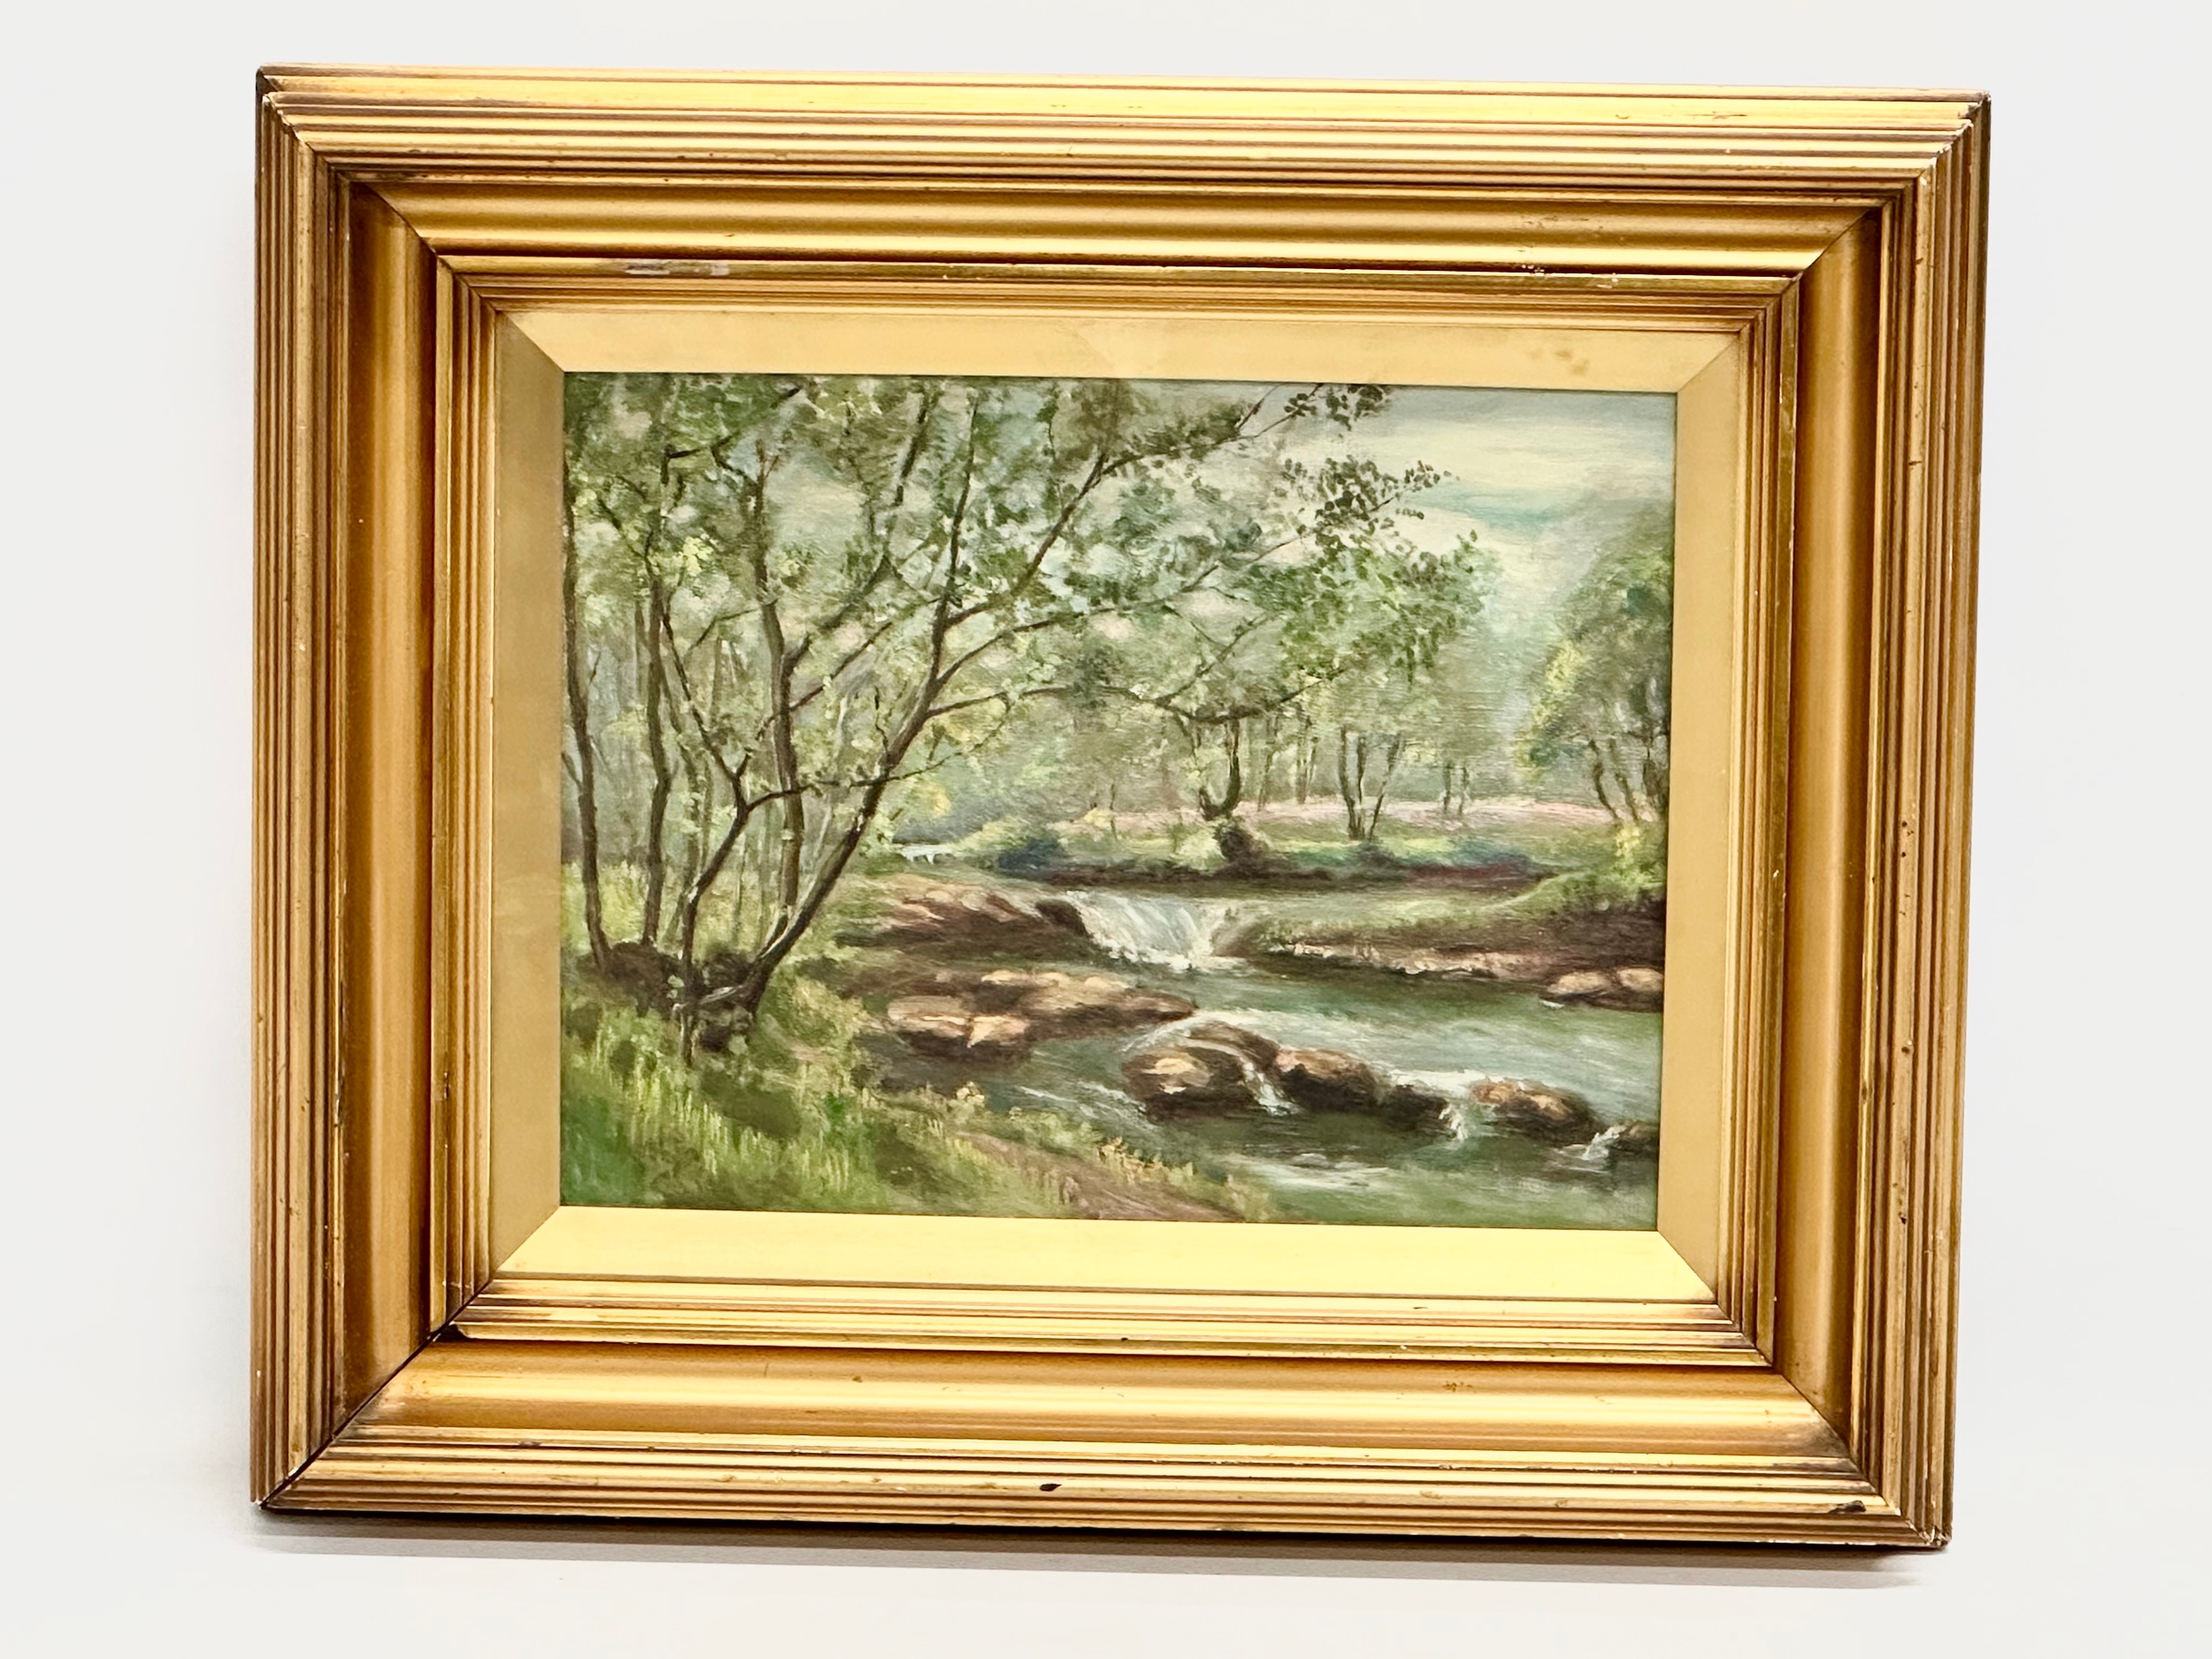 A Late 19th Century oil painting on canvas. In original gilt frame. 41x30cm. Frame 59.5x10x51cm